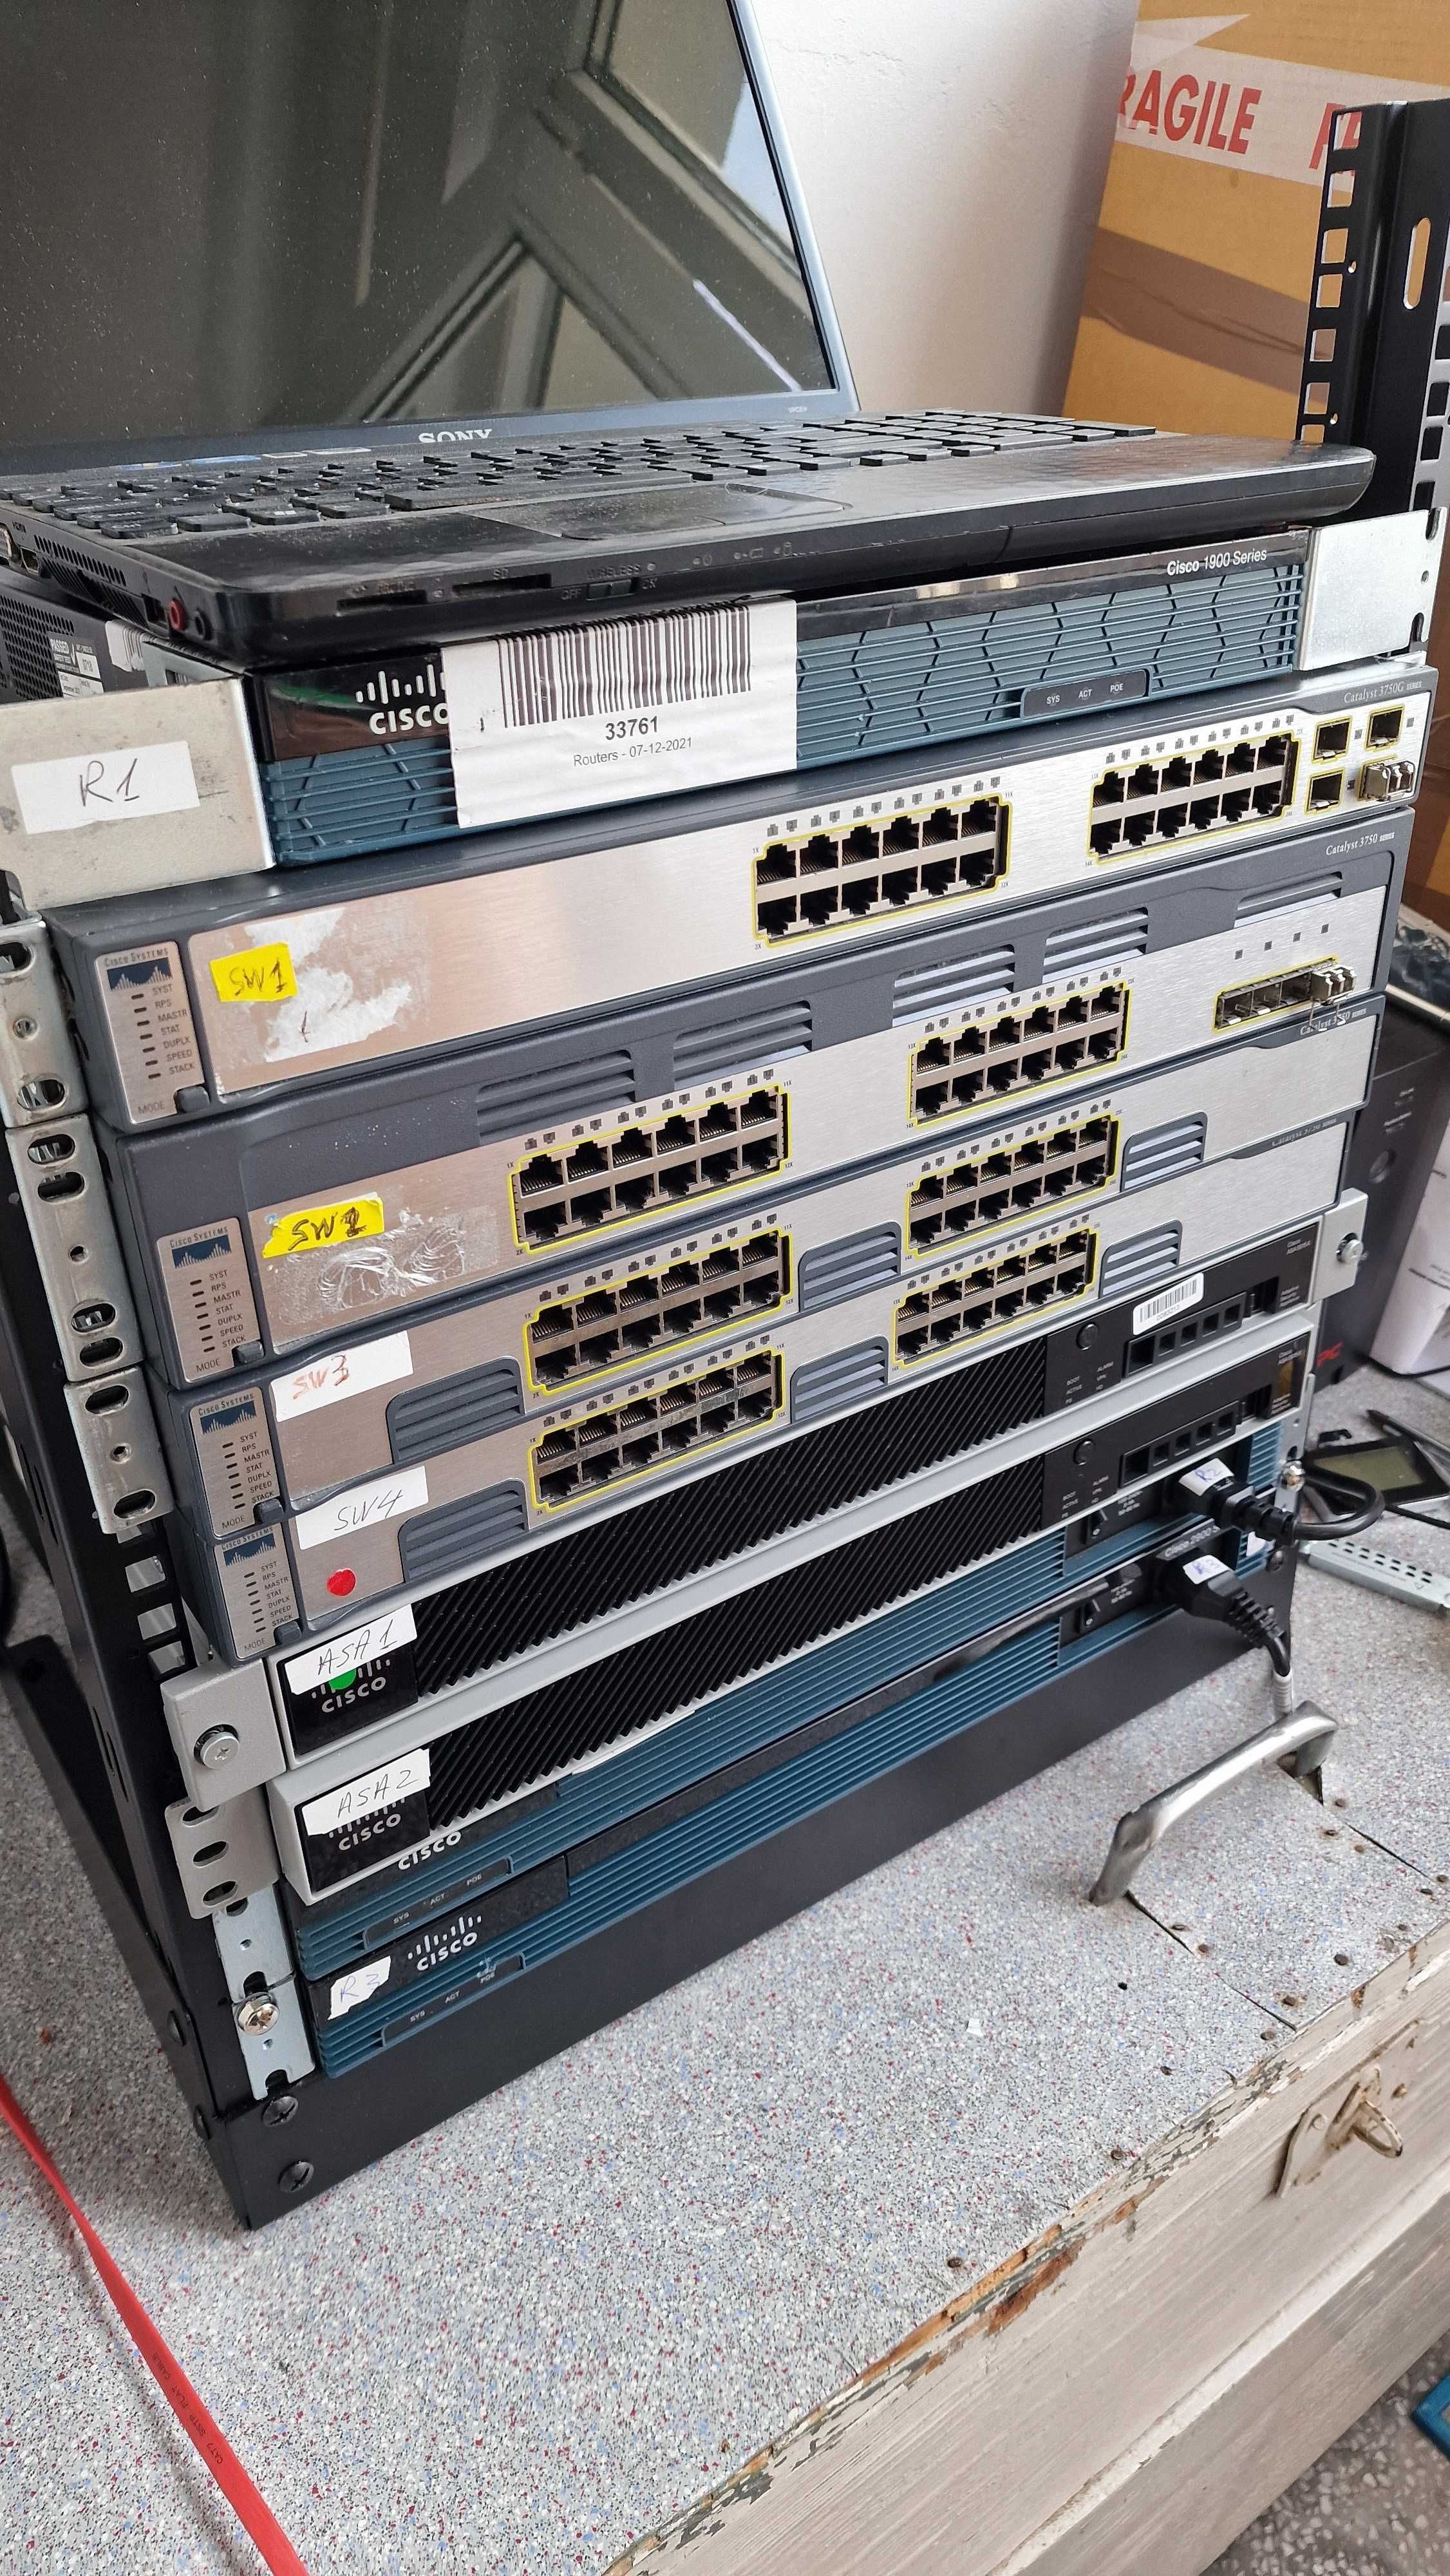 Cisco rack CCNA, CCNP, 4 switch, 3 routers, 2 ASA Firewall